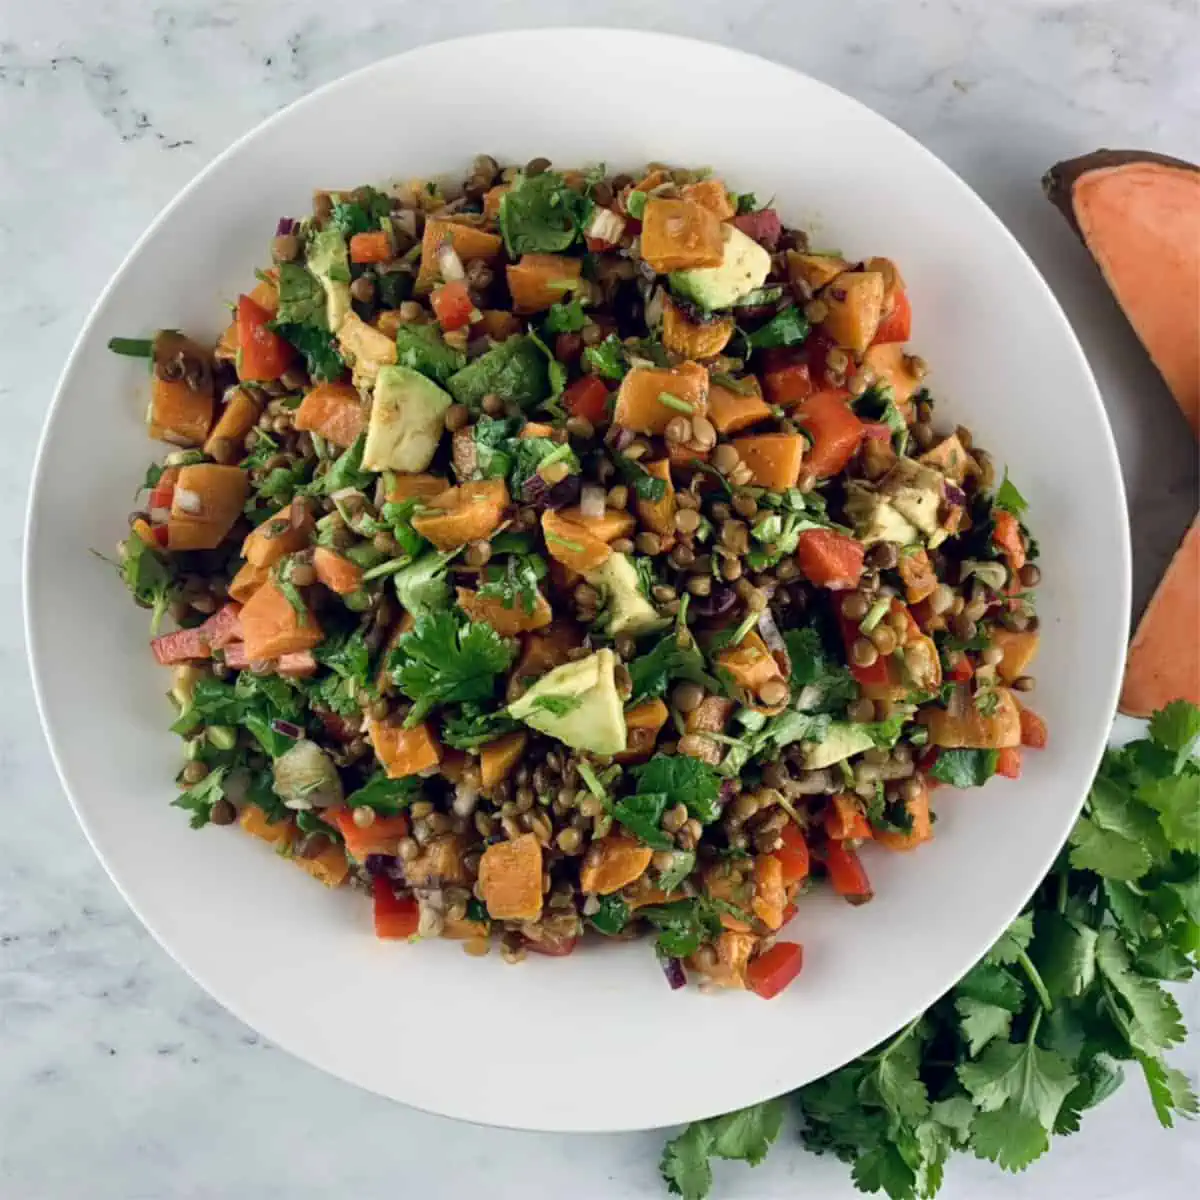 Lentil sweet potato salad in a white bowl with sweet potato halves and coriander/cilantro sprigs on the side.